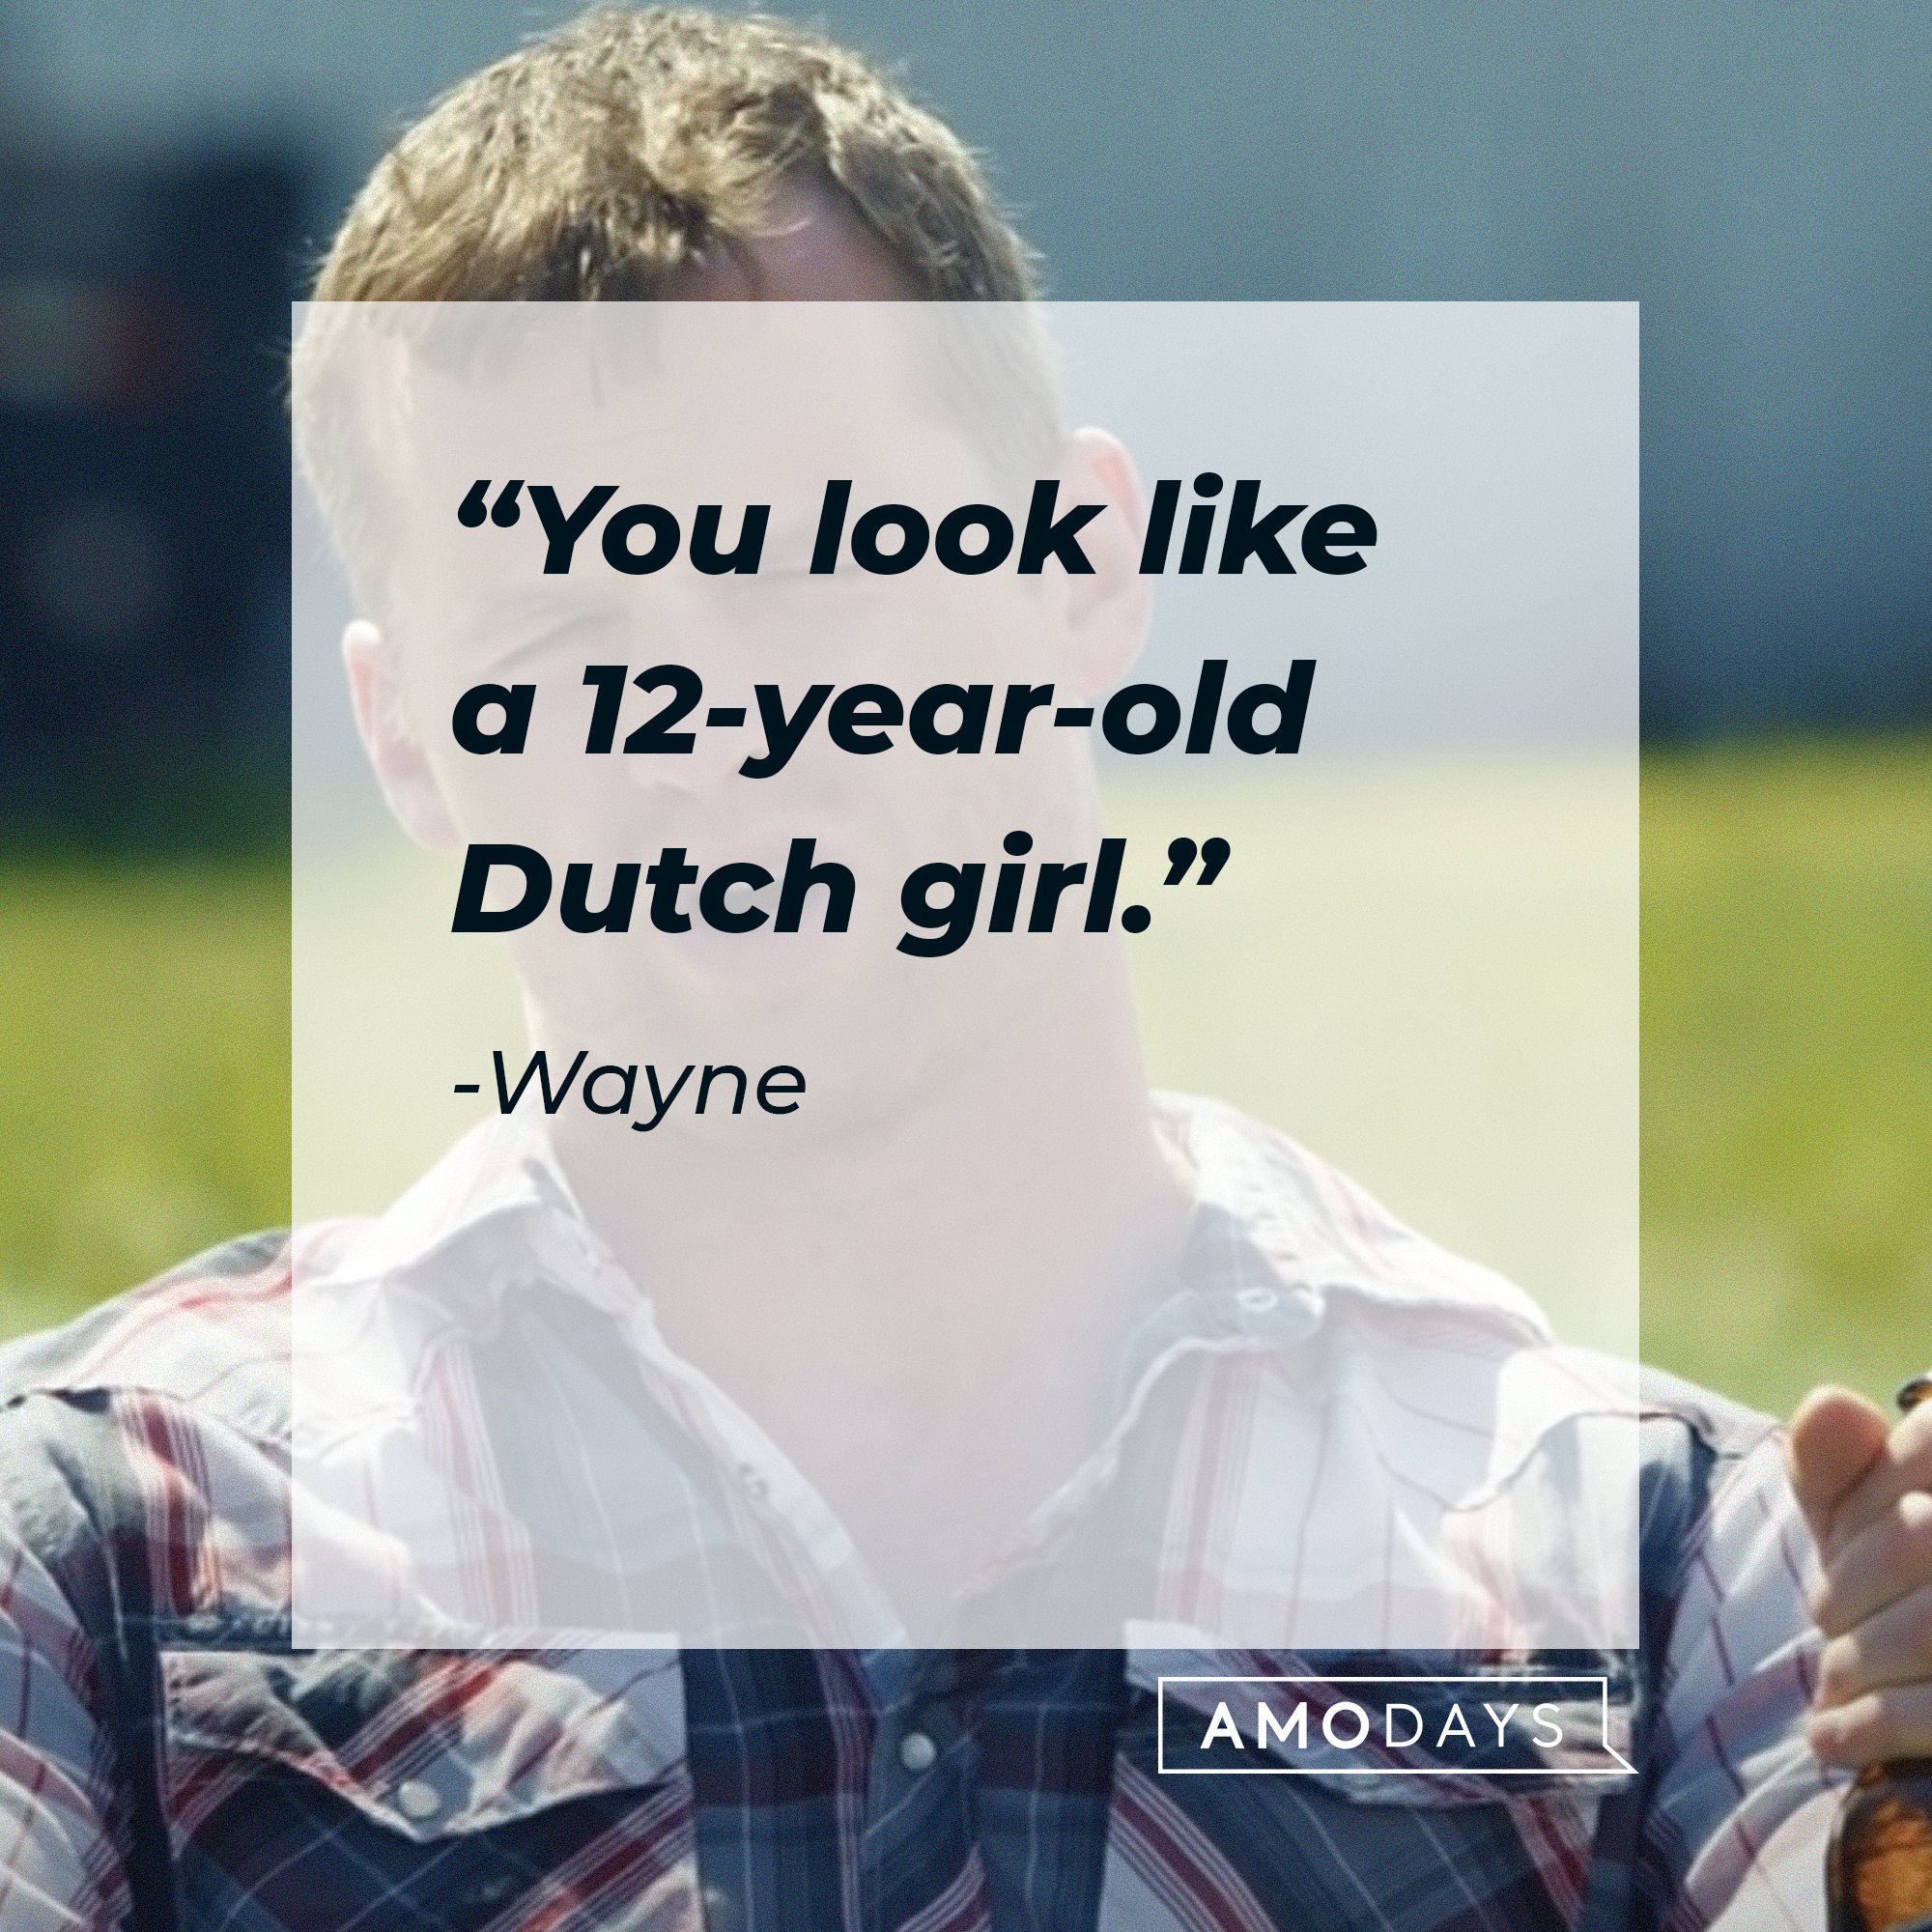 Wayne’s quote: “You look like a 12-year-old Dutch girl.” | Image: AmoDays